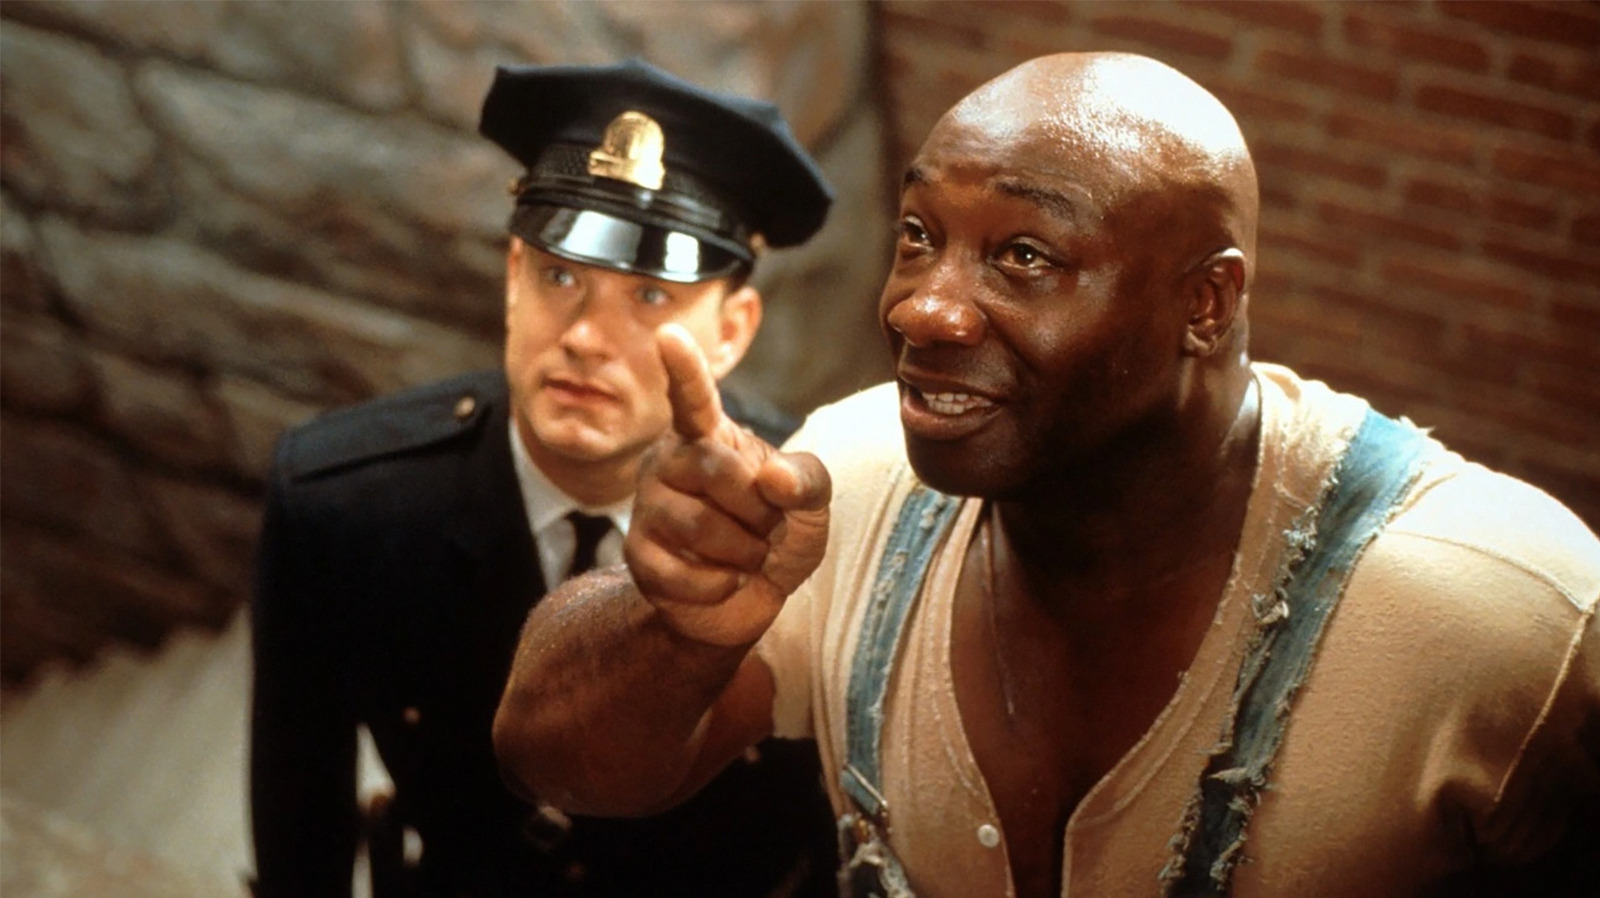 The Green Mile Ending Explained: The Curse Of A Healing Touch